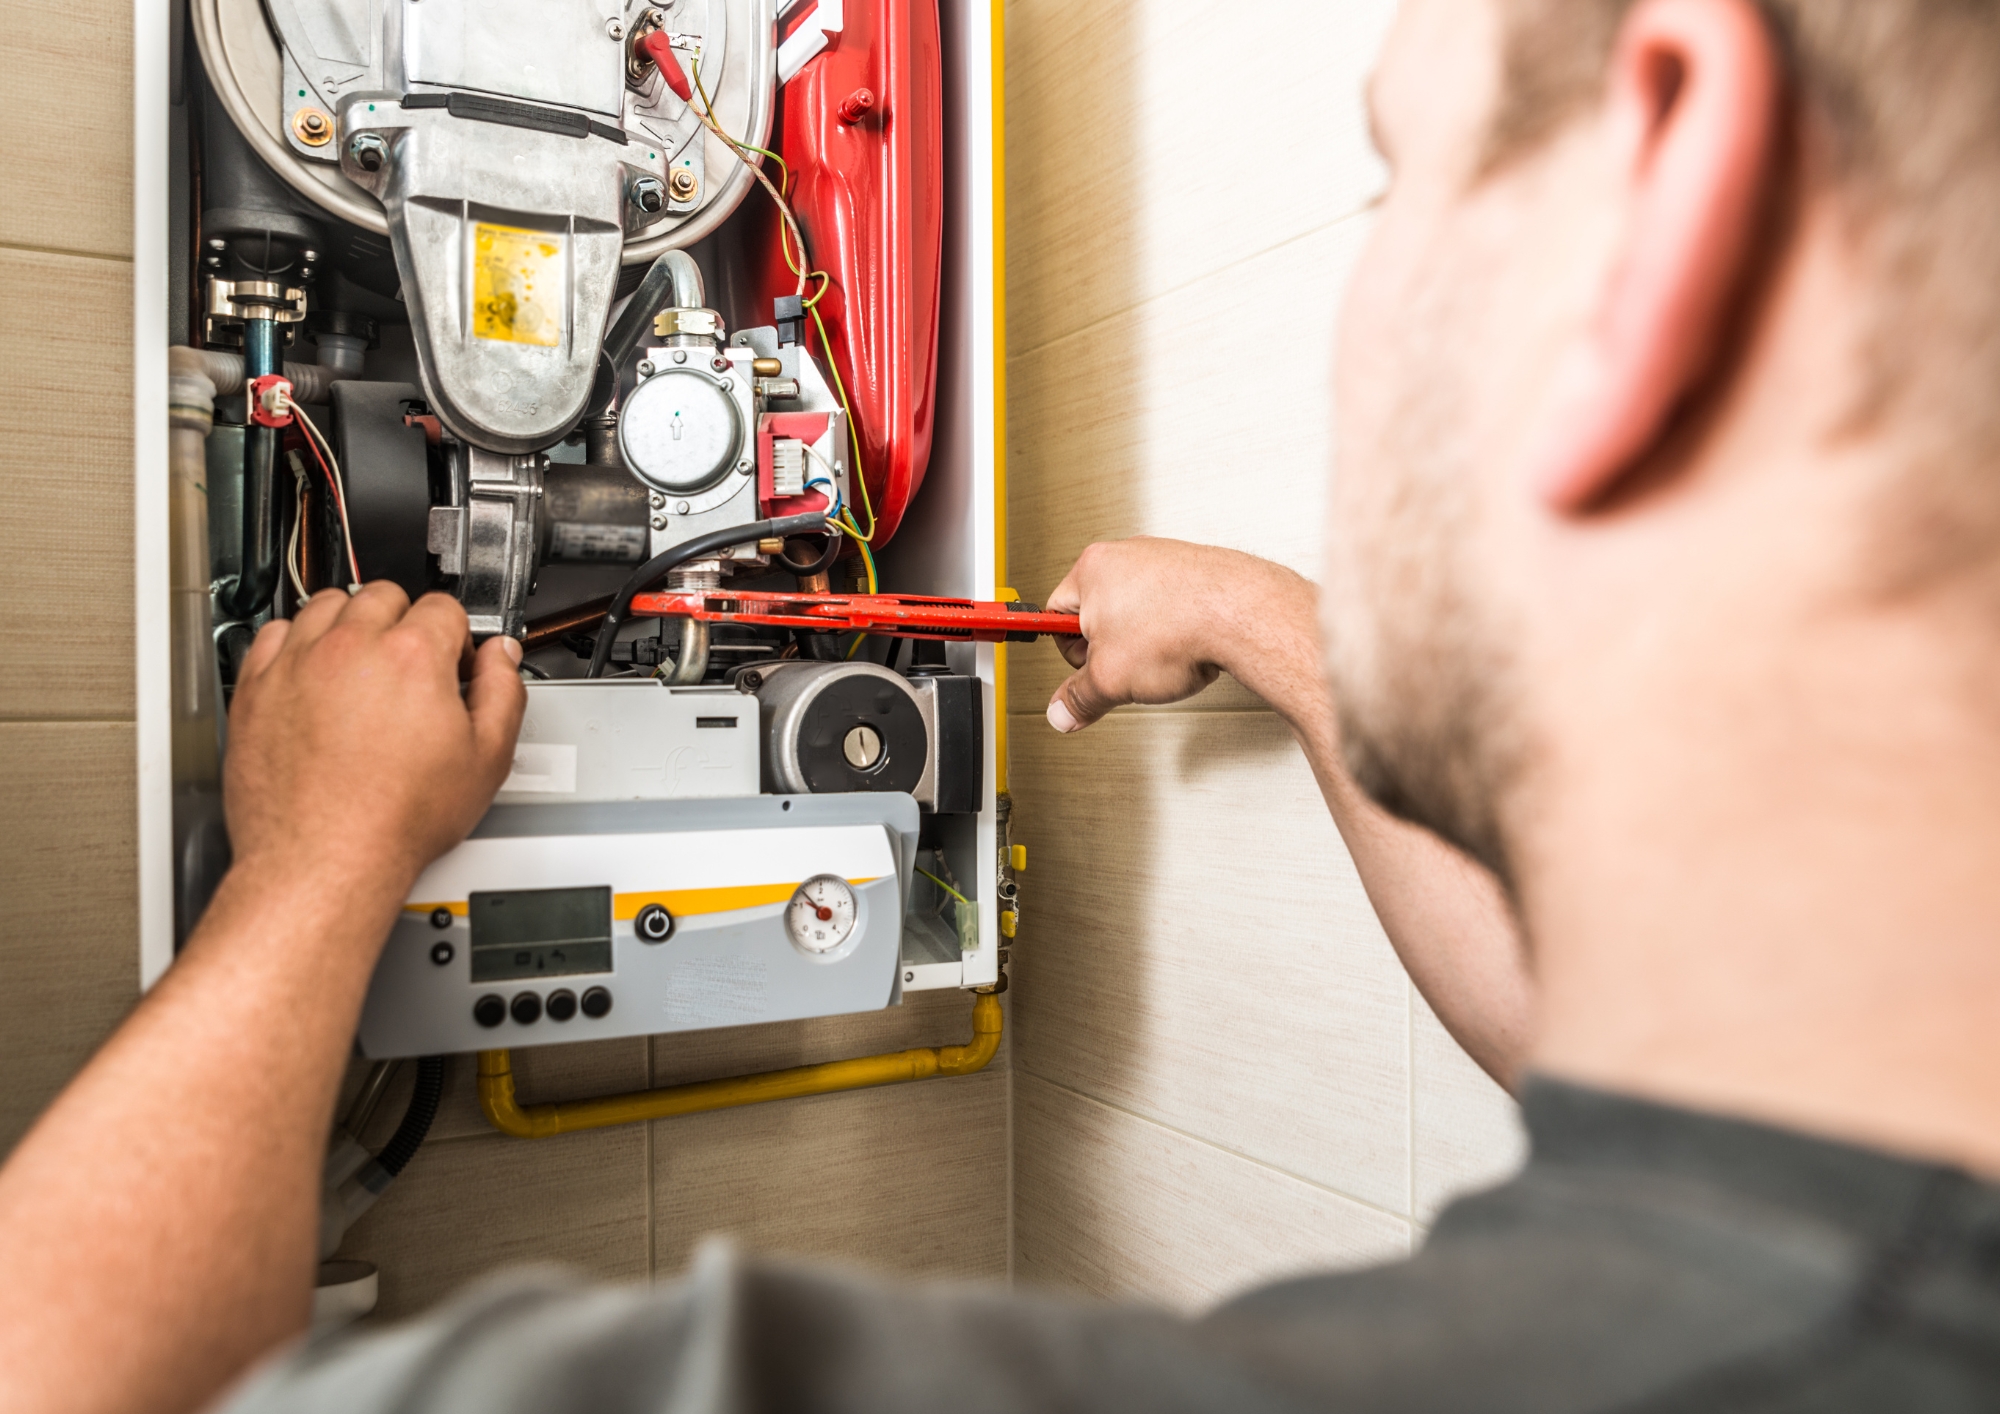 How Long Does it Take to Install a Furnace?